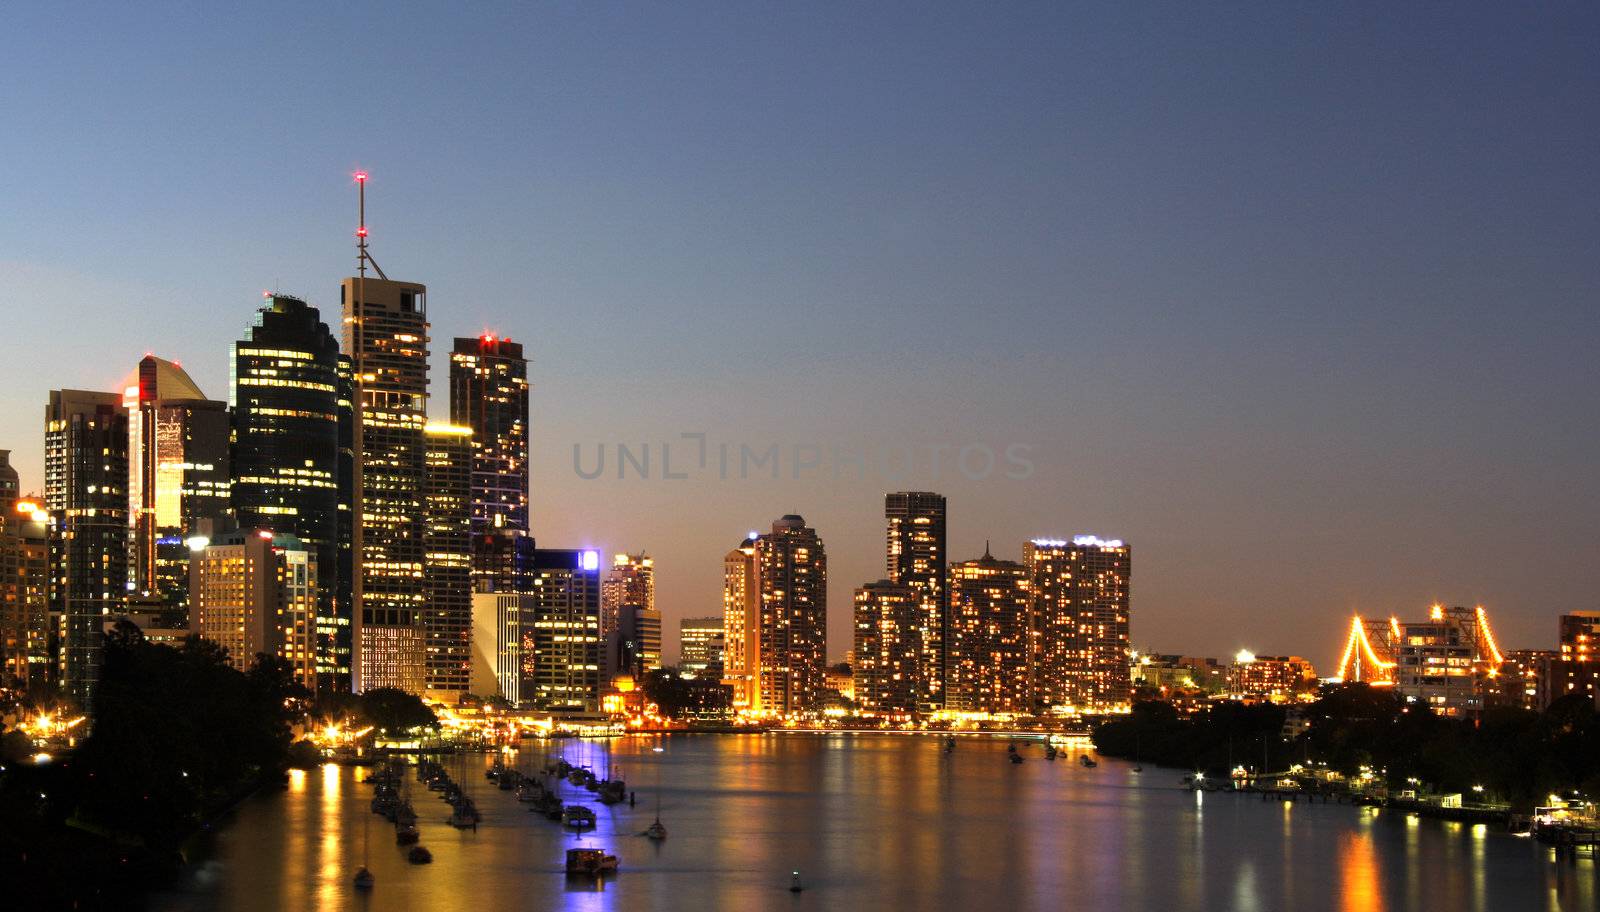 Brisbane Australia by the river at night